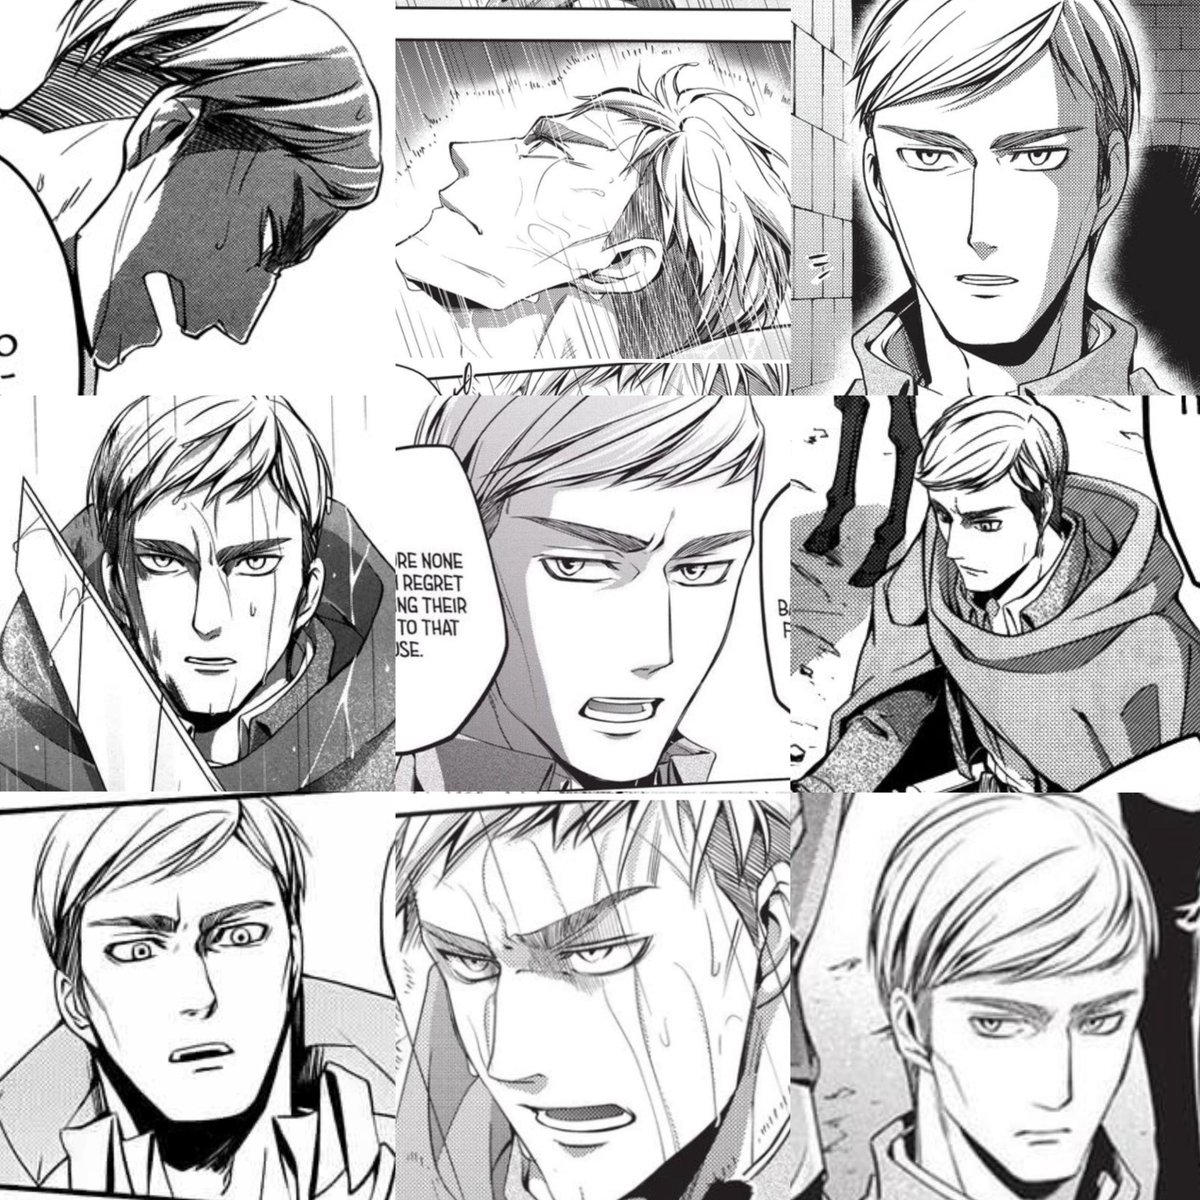 no thoughts, just no regrets erwin